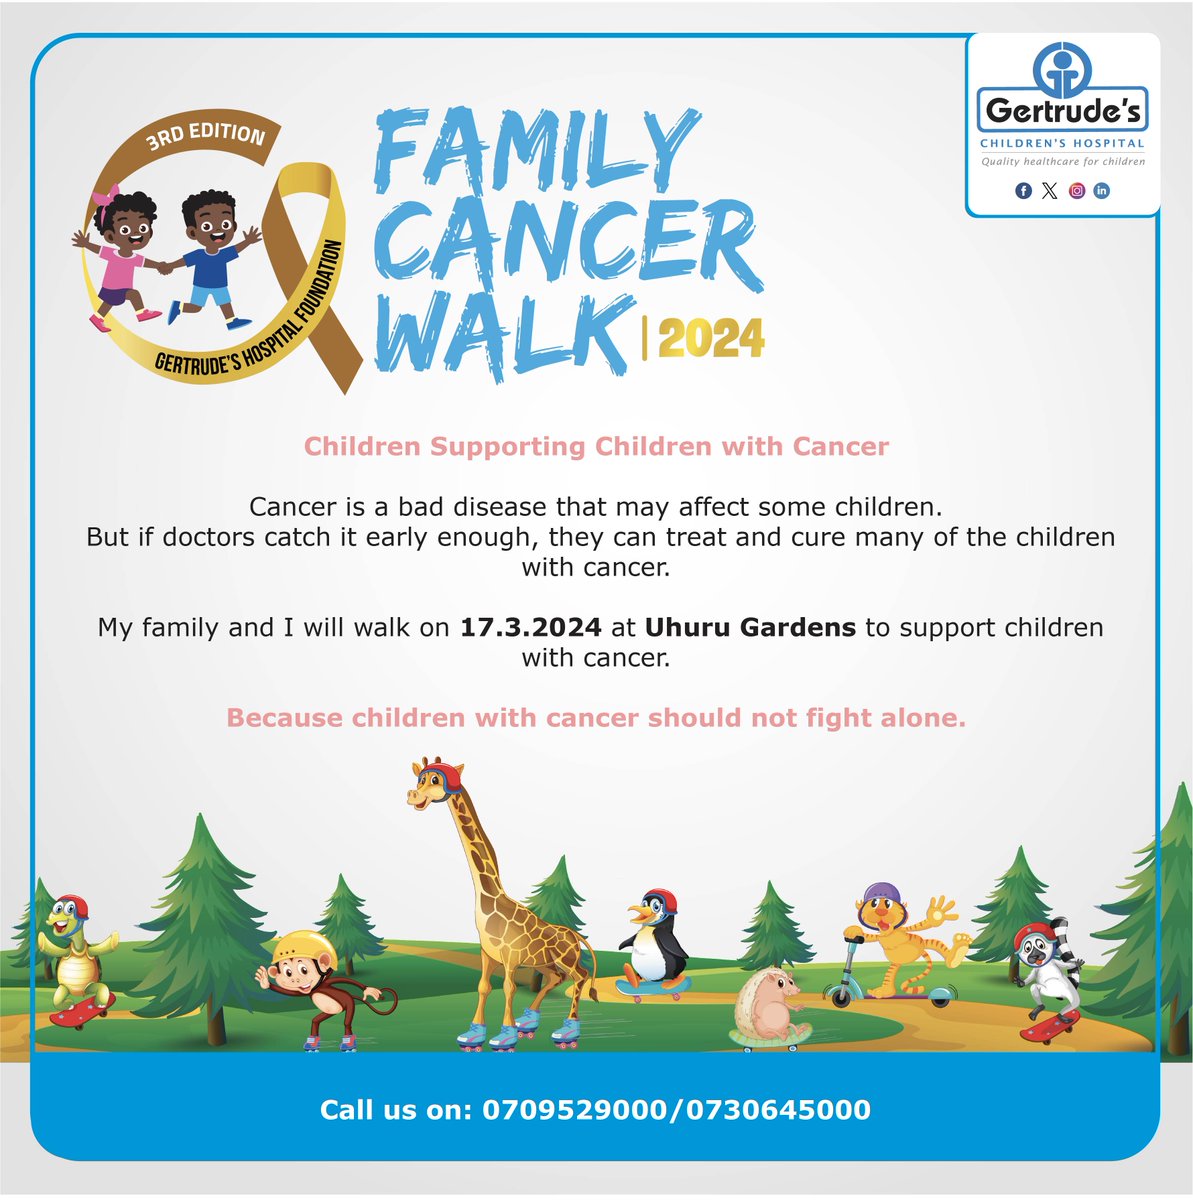 Lace-up your shoes for a cause! Gertrude's Children's Hospital is hosting its Annual Charity Walk on March 17, 2024, to raise funds for the treatment of children with cancer. Buy a T-shirt to show your support! Call 0705144316. #AnnualFamilyWalk2024 #GertrudesKe